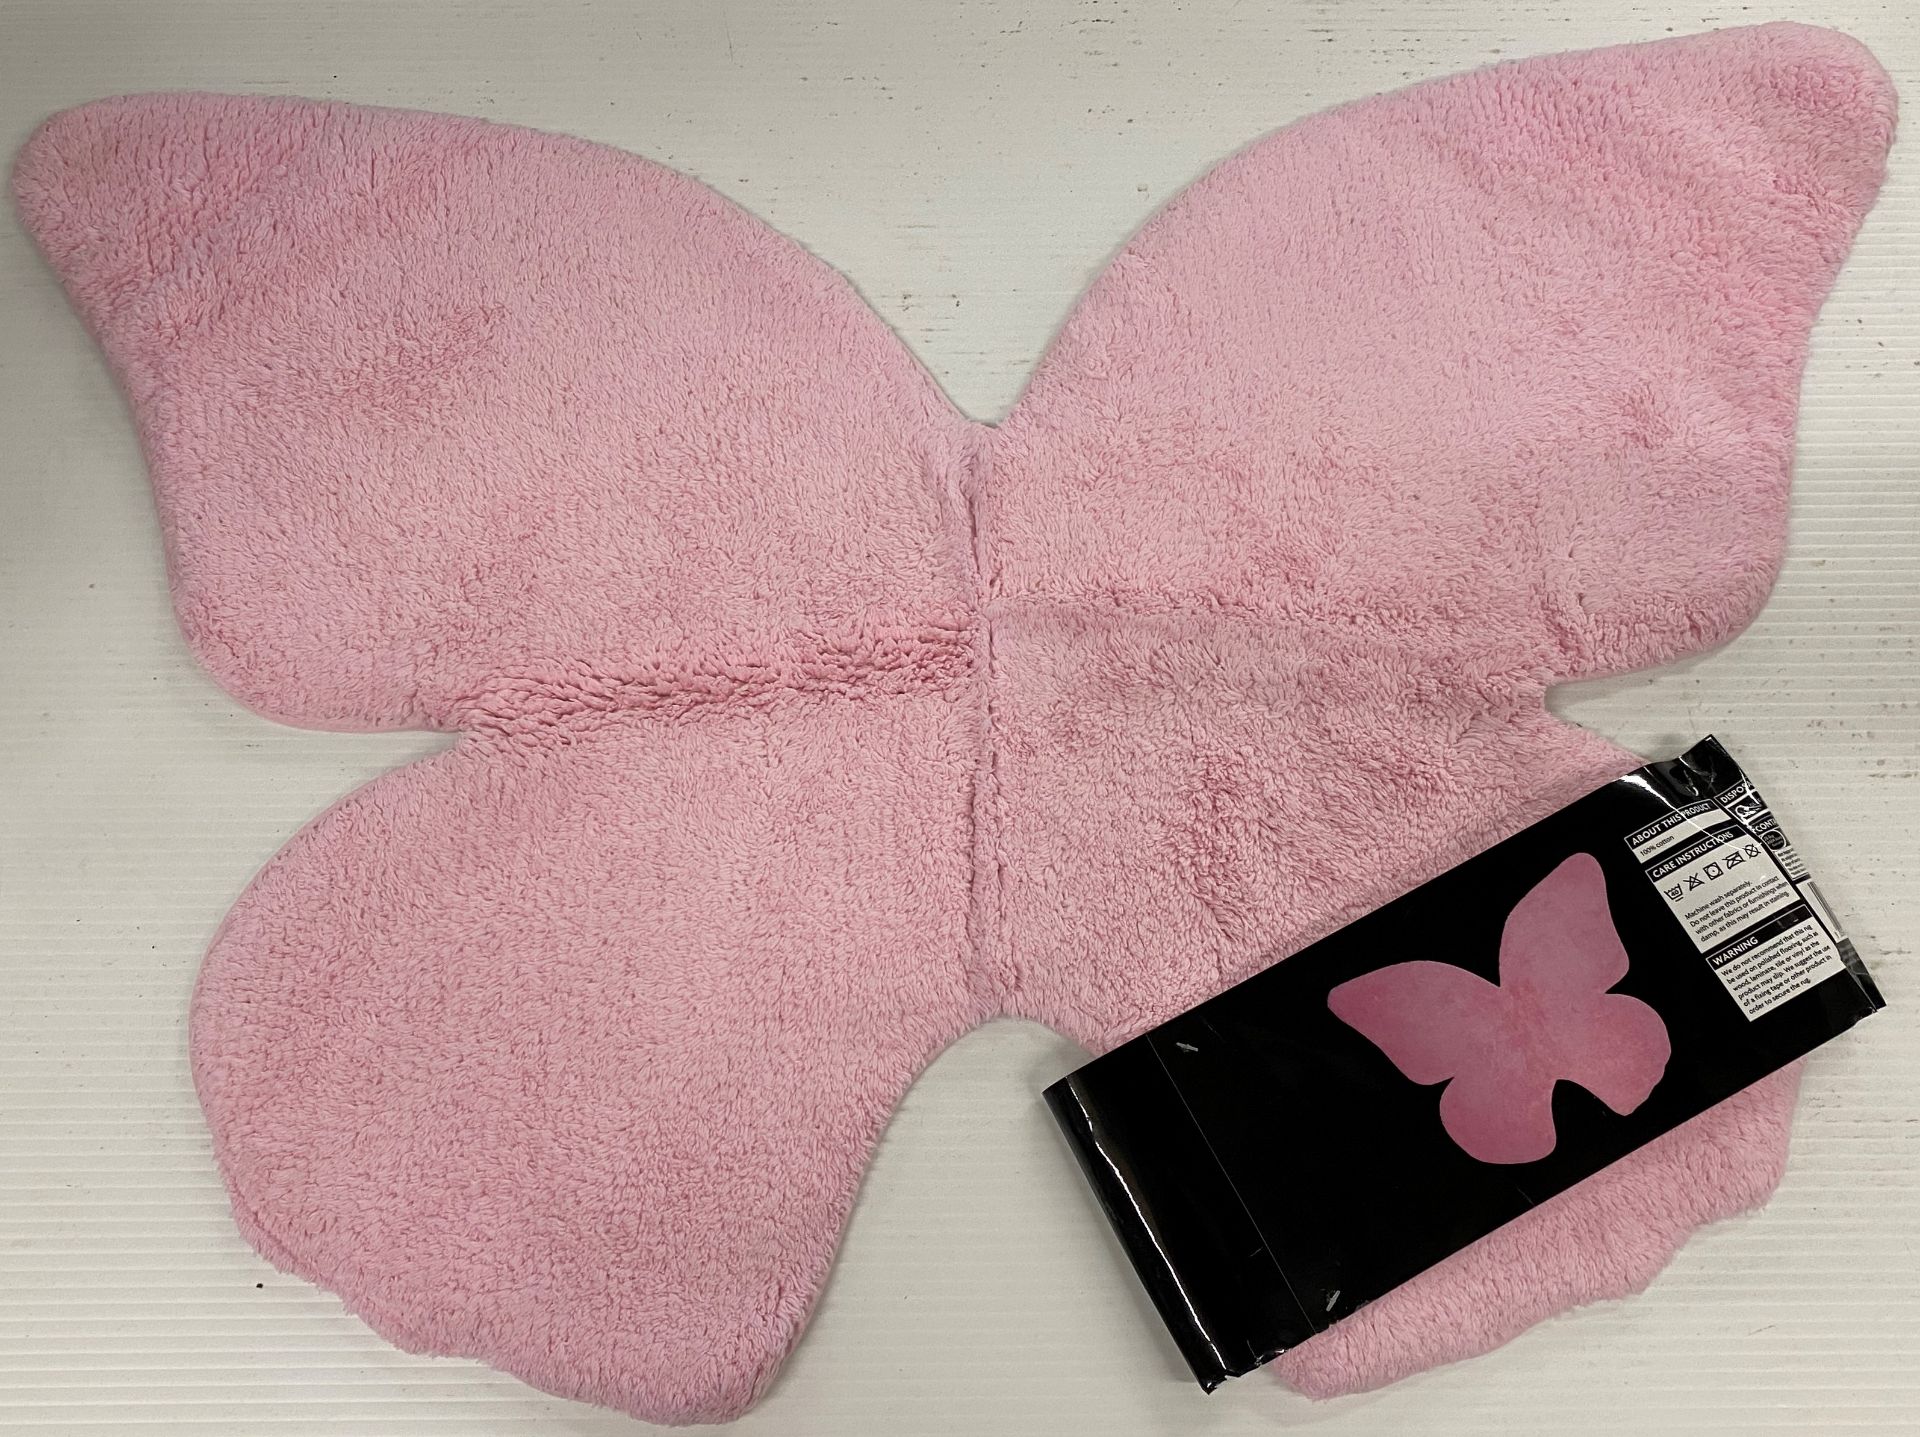 120 x Asda Pink Butterfly Rugs/Bathmats - 58cm x 80cm - Individually sealed and packed as 3 per